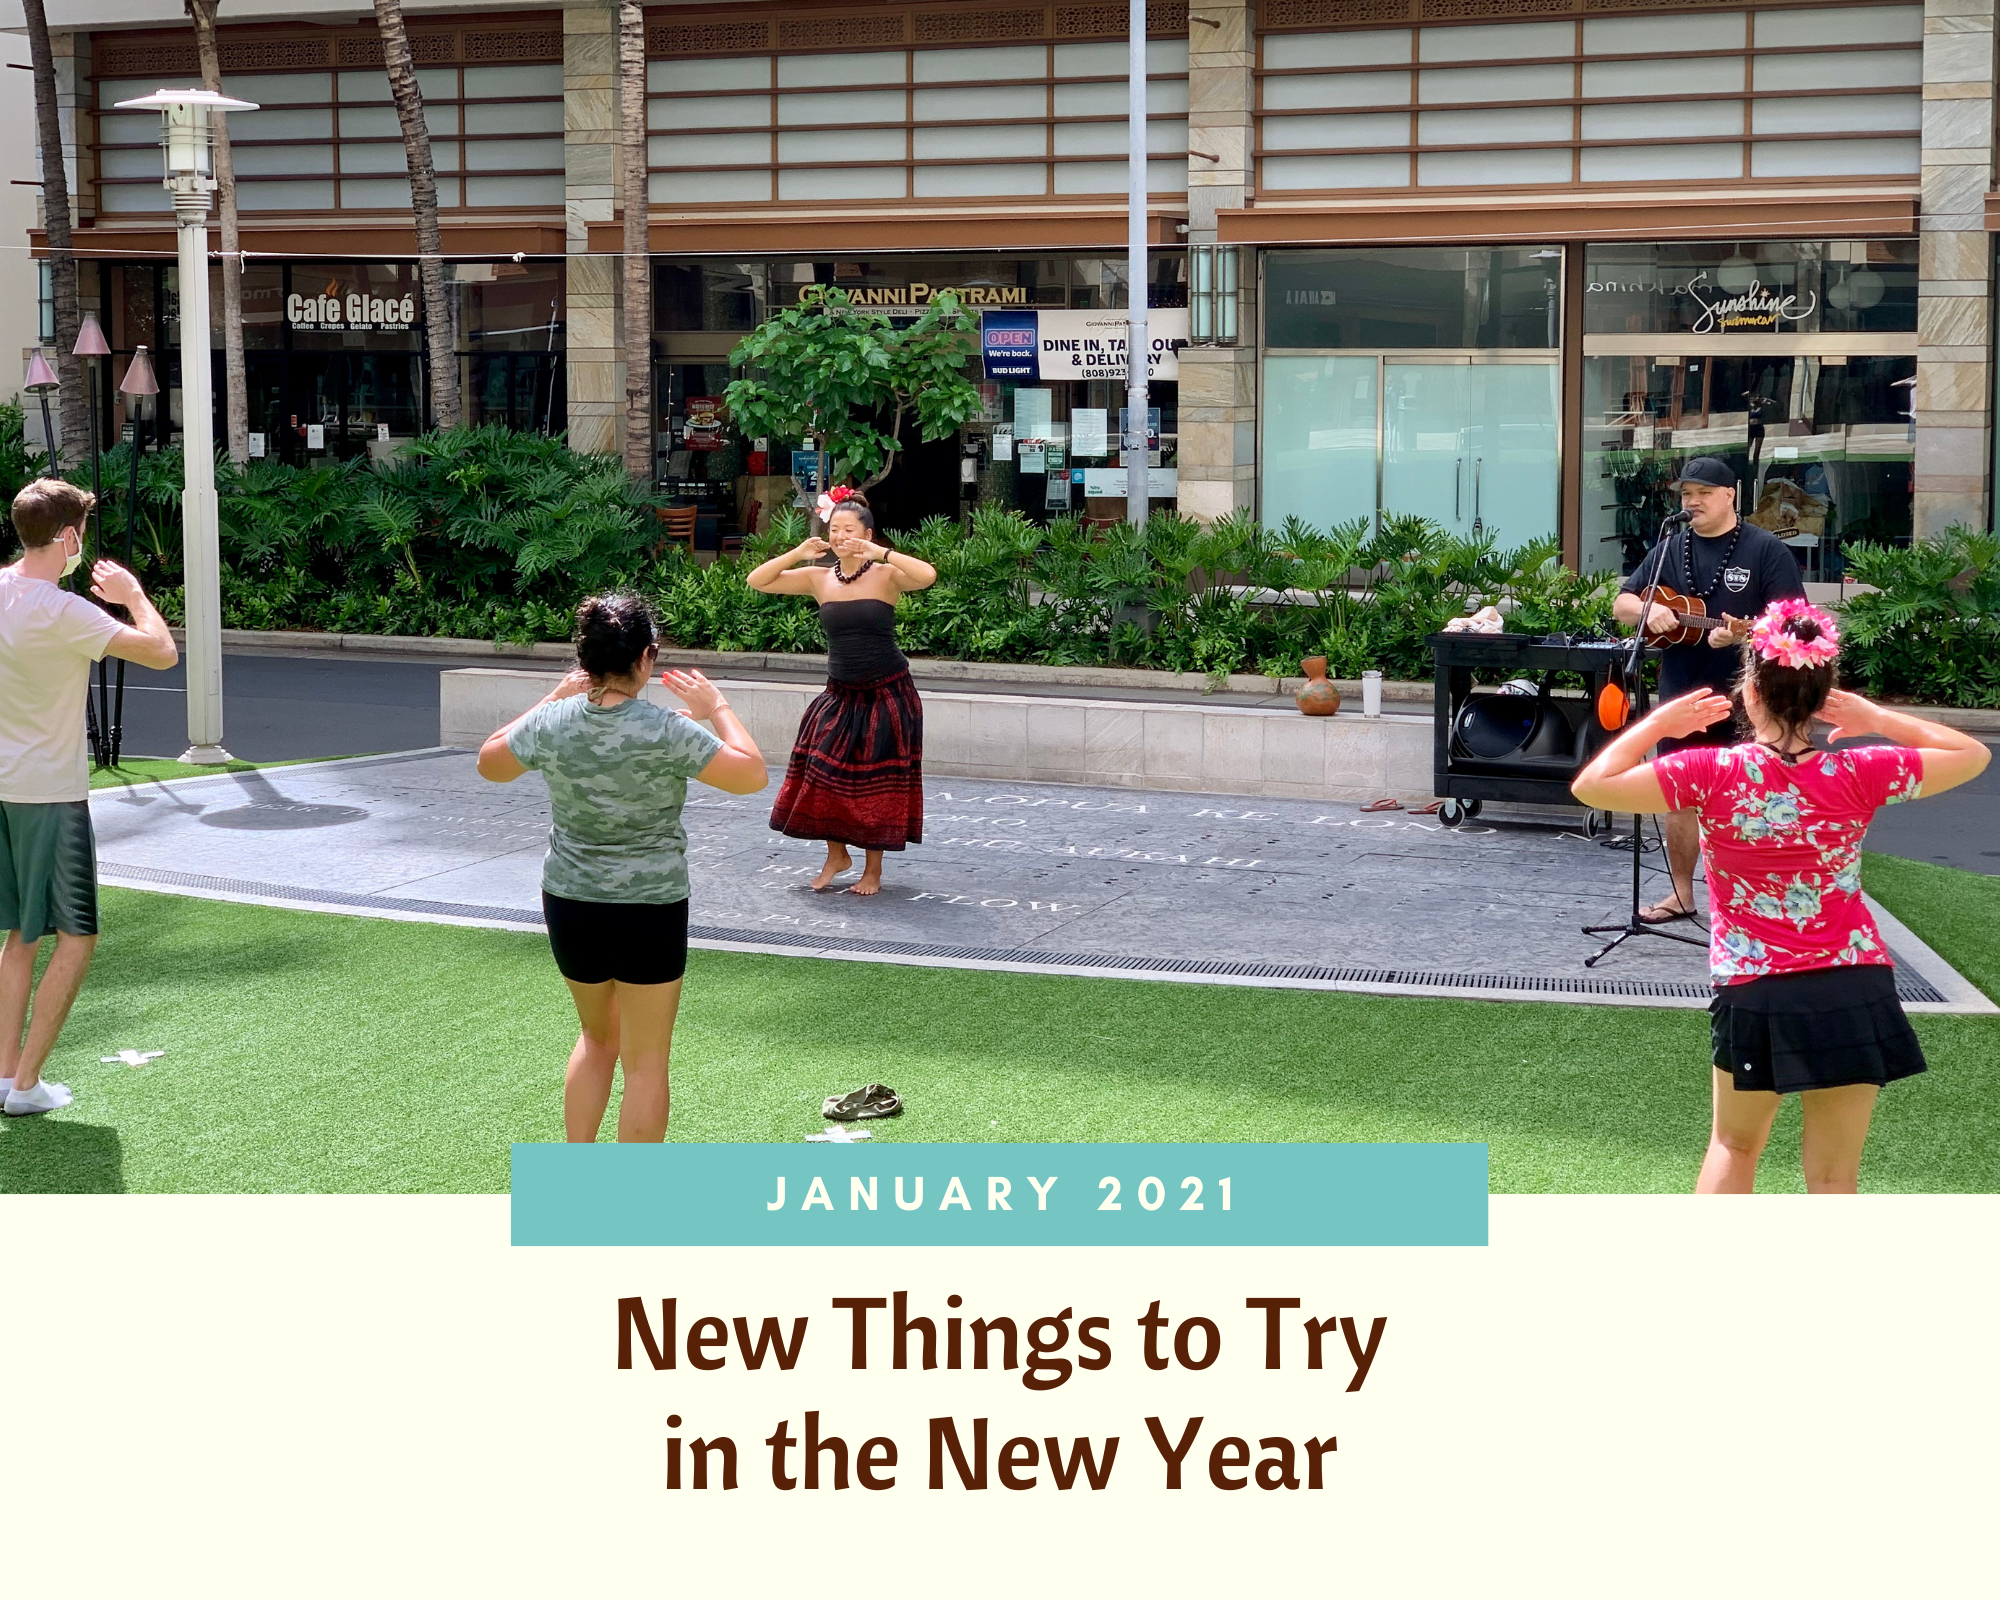 January 2021: New Things to Try in the New Year